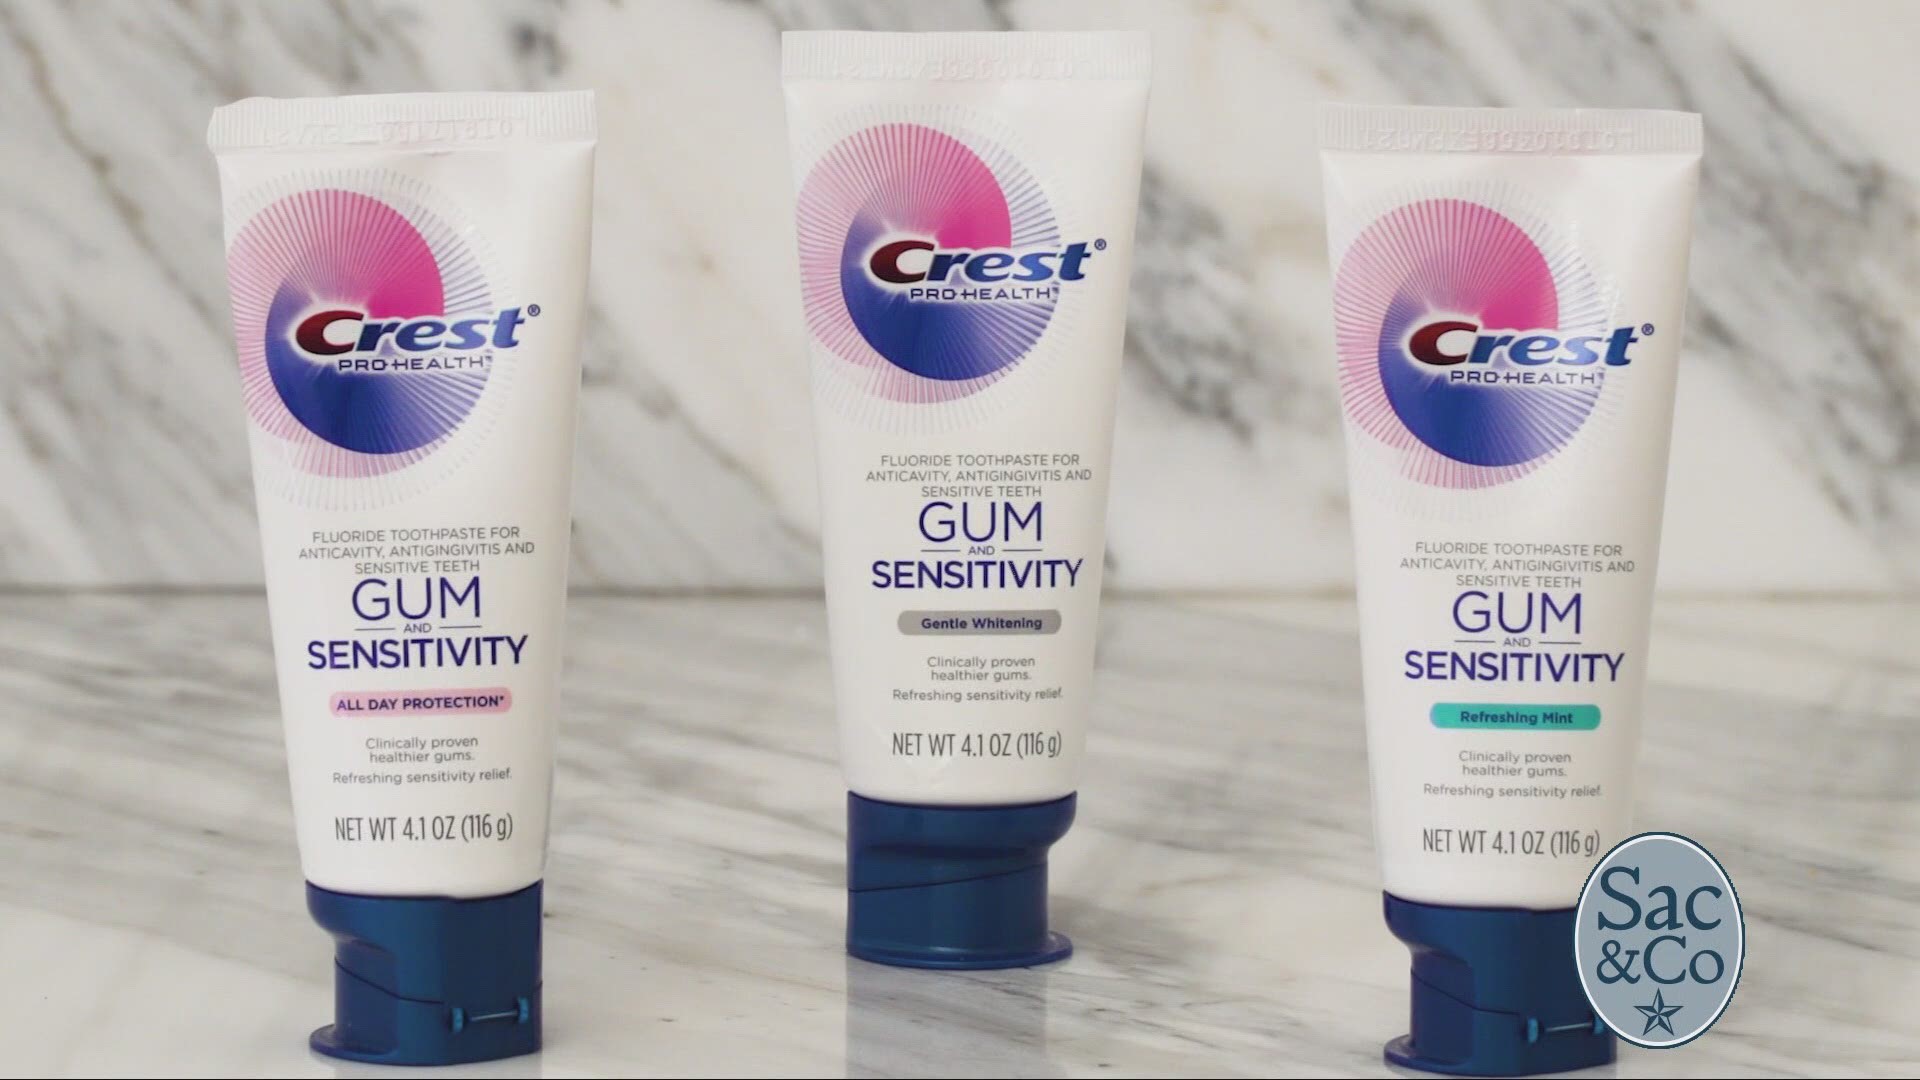 Learn how Crest can help you if you suffer from tooth sensitivity! The following is a paid segment sponsored by Crest.